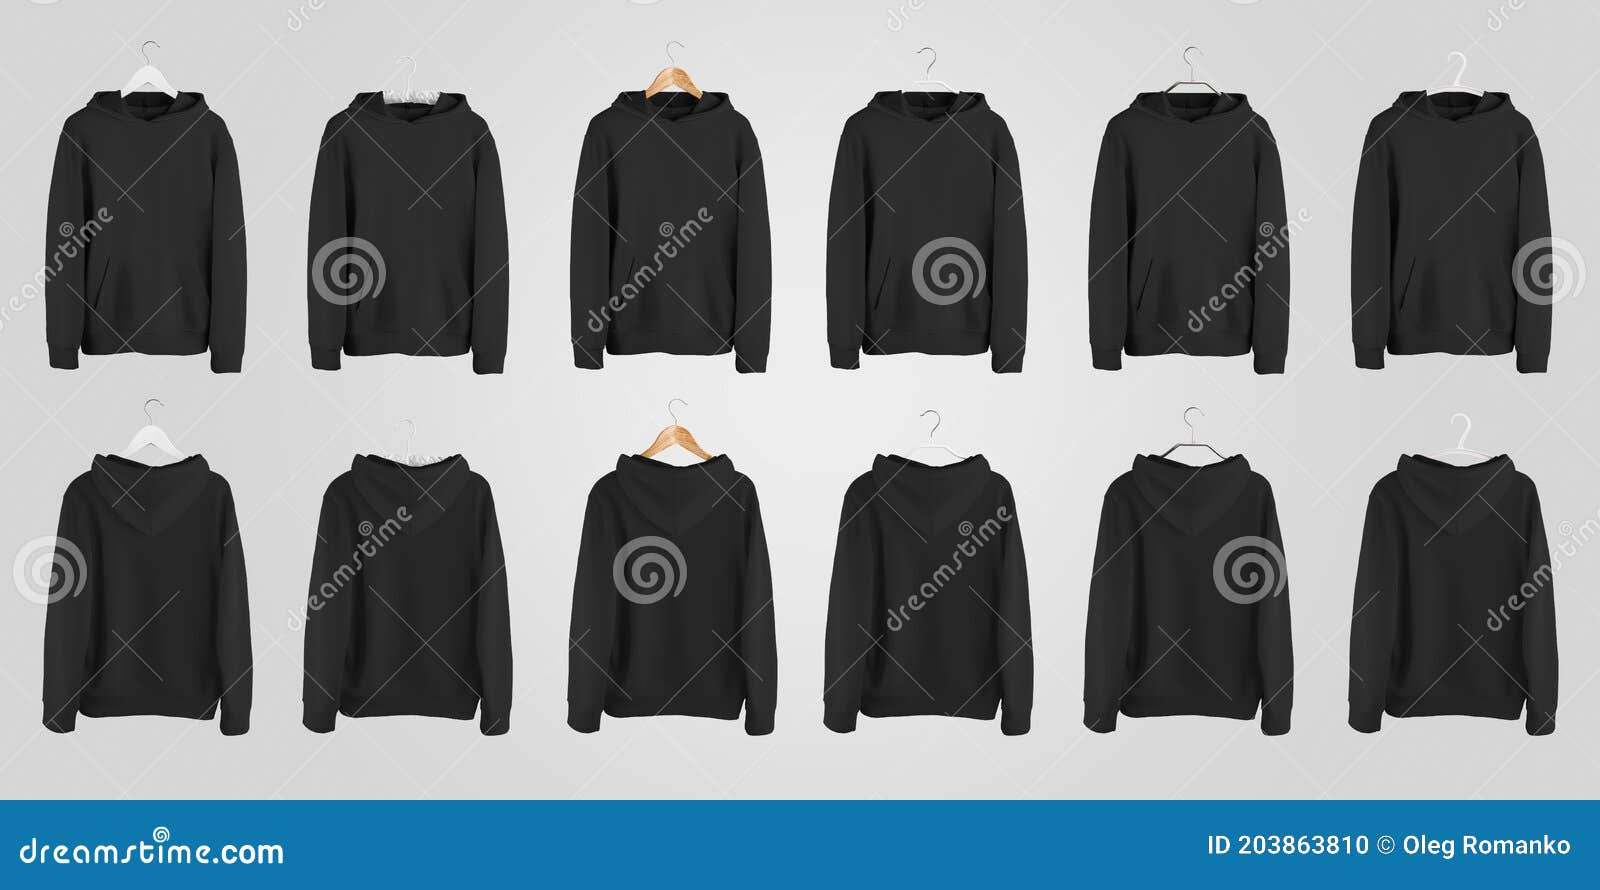 Download Mockup Of A Black Blank Hoodie With A Pocket On Different ...